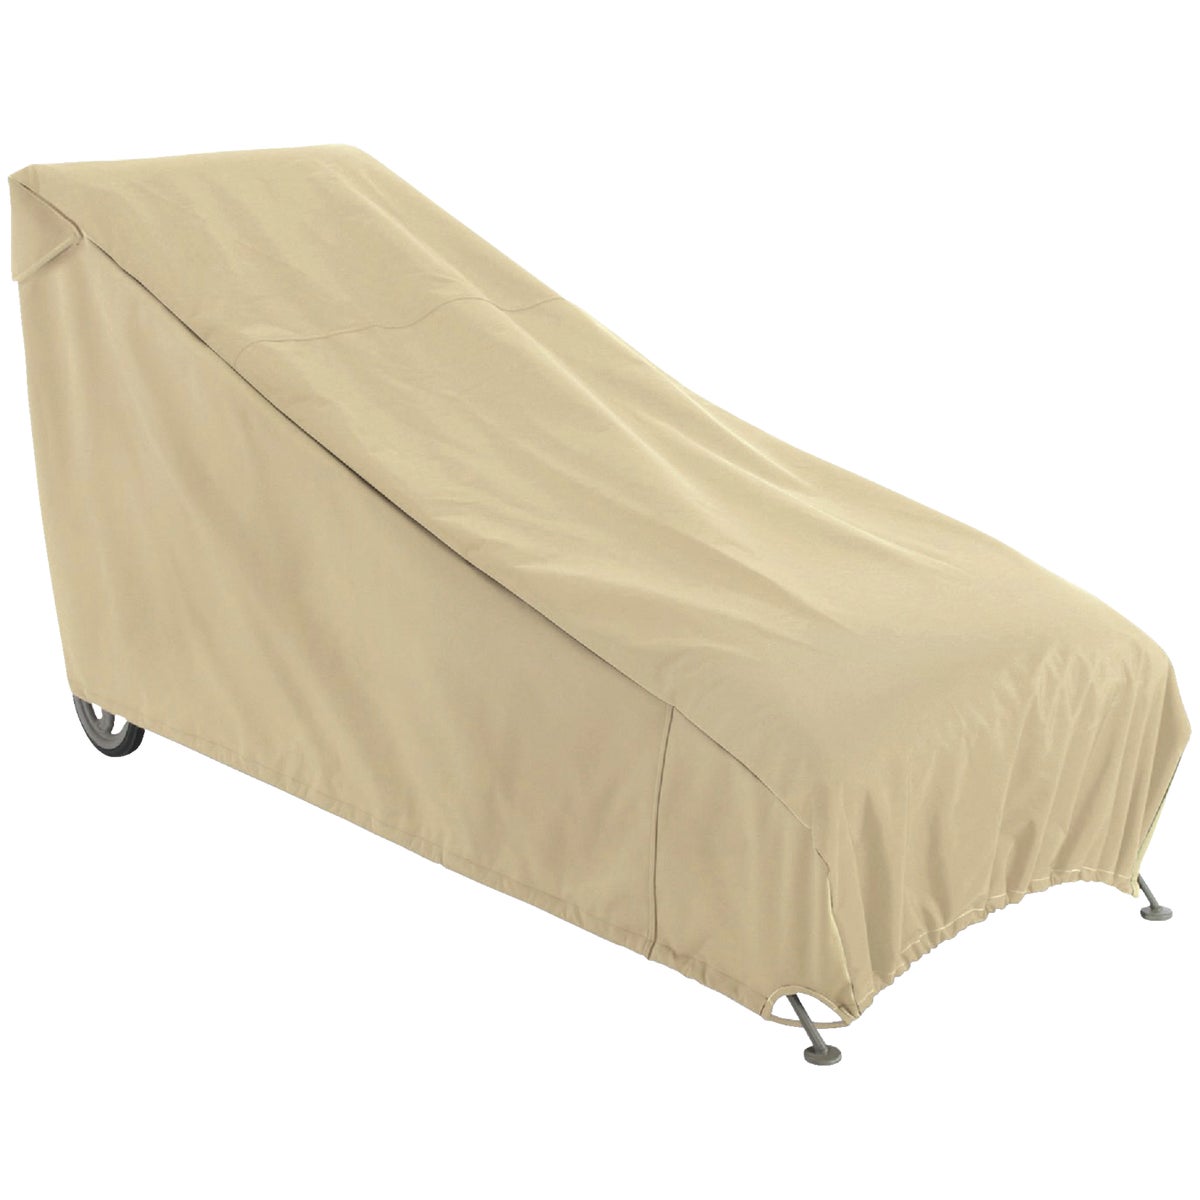 Item 817744, Fits chaises up to 65" L. x 28" W. x 29" H.